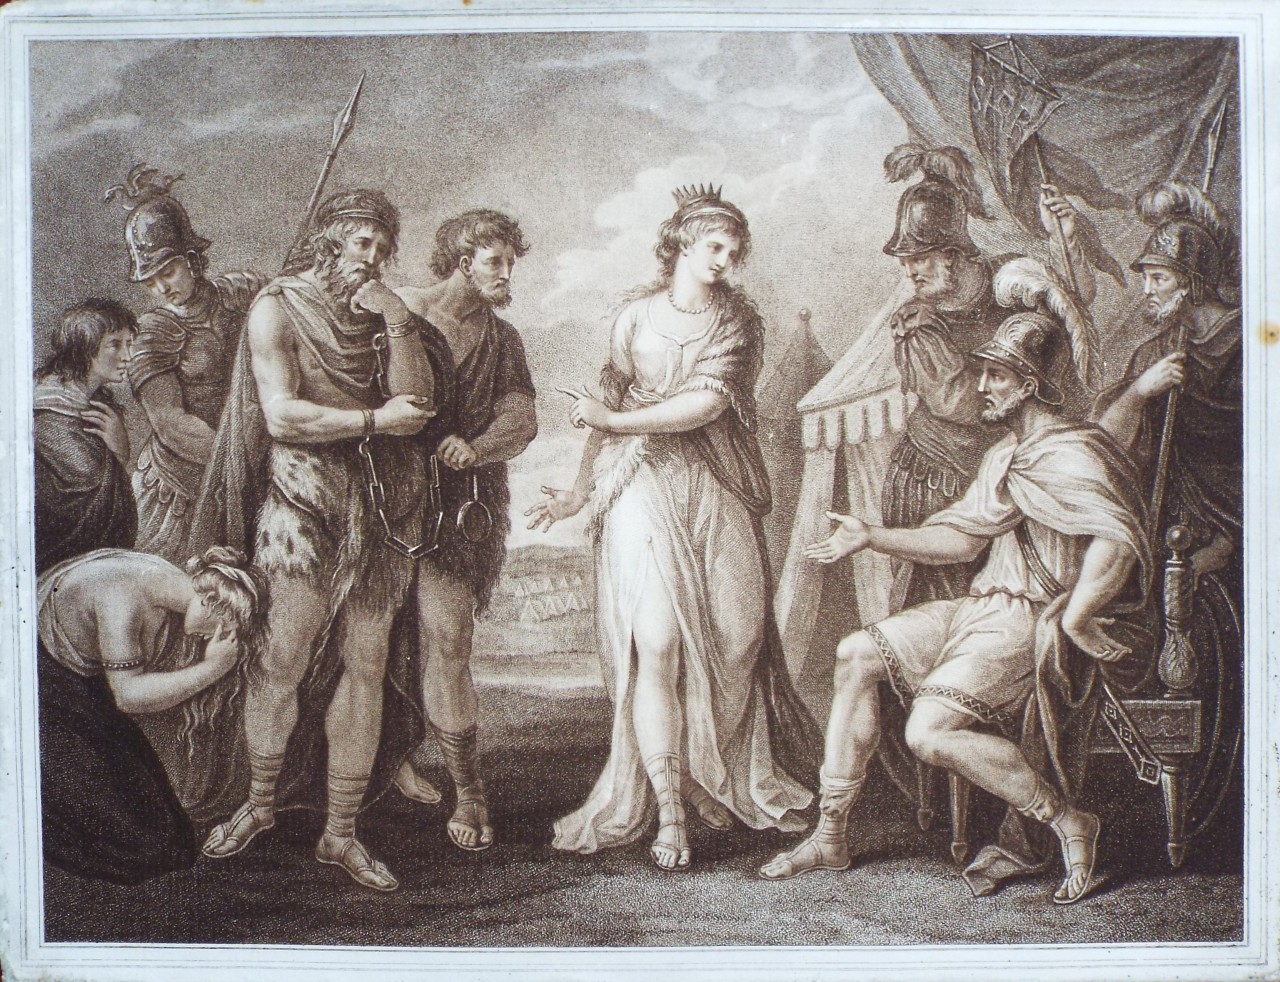 Stipple - Caractacus, King of the Silures, deliver'd up to Ostorius, the Roman General, by Cartismandua, Queen of the Brigantes. - Bartolozzi